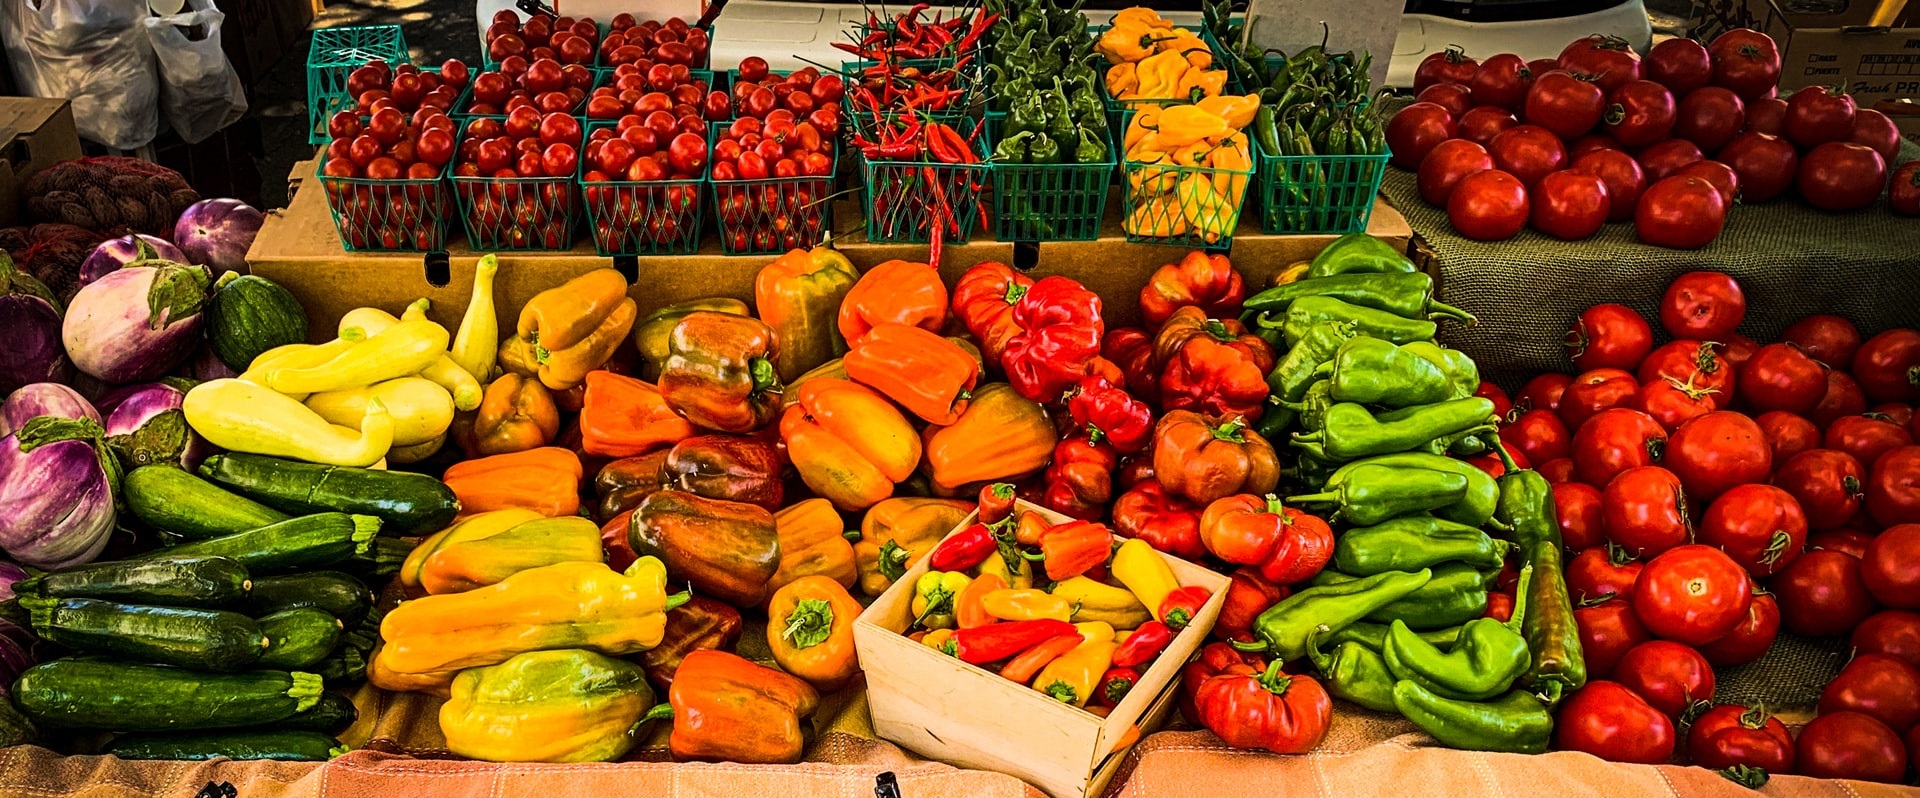 Vegetables for sale at a food stand